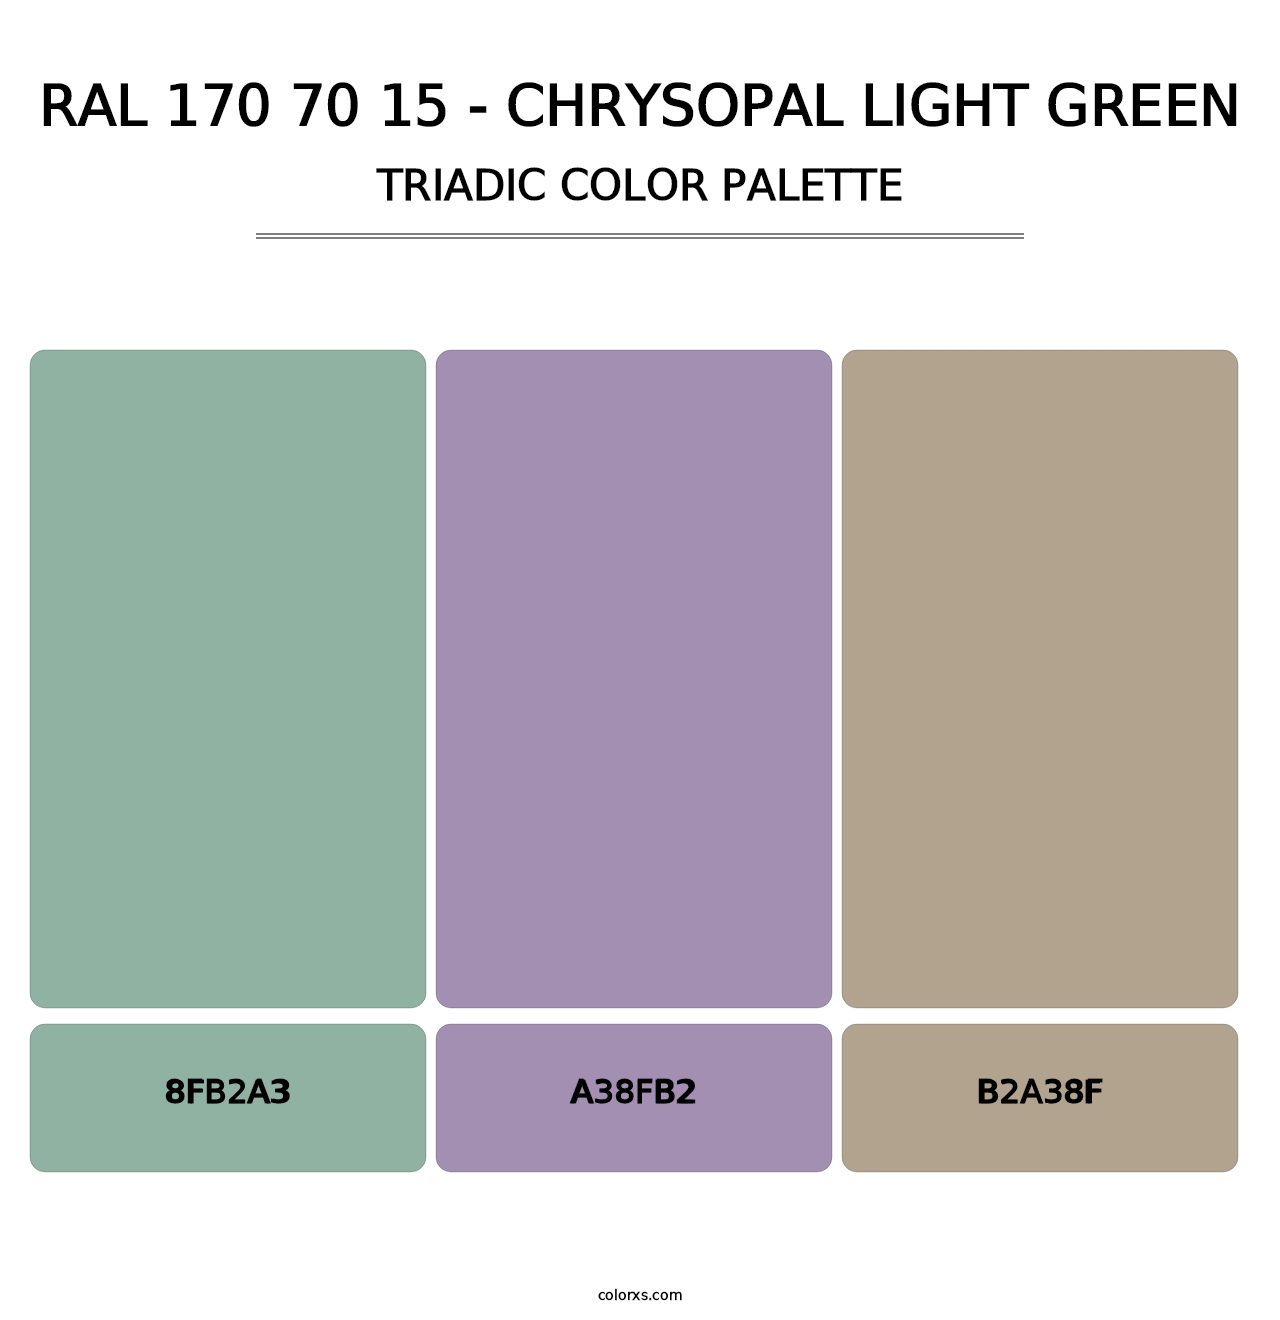 RAL 170 70 15 - Chrysopal Light Green - Triadic Color Palette